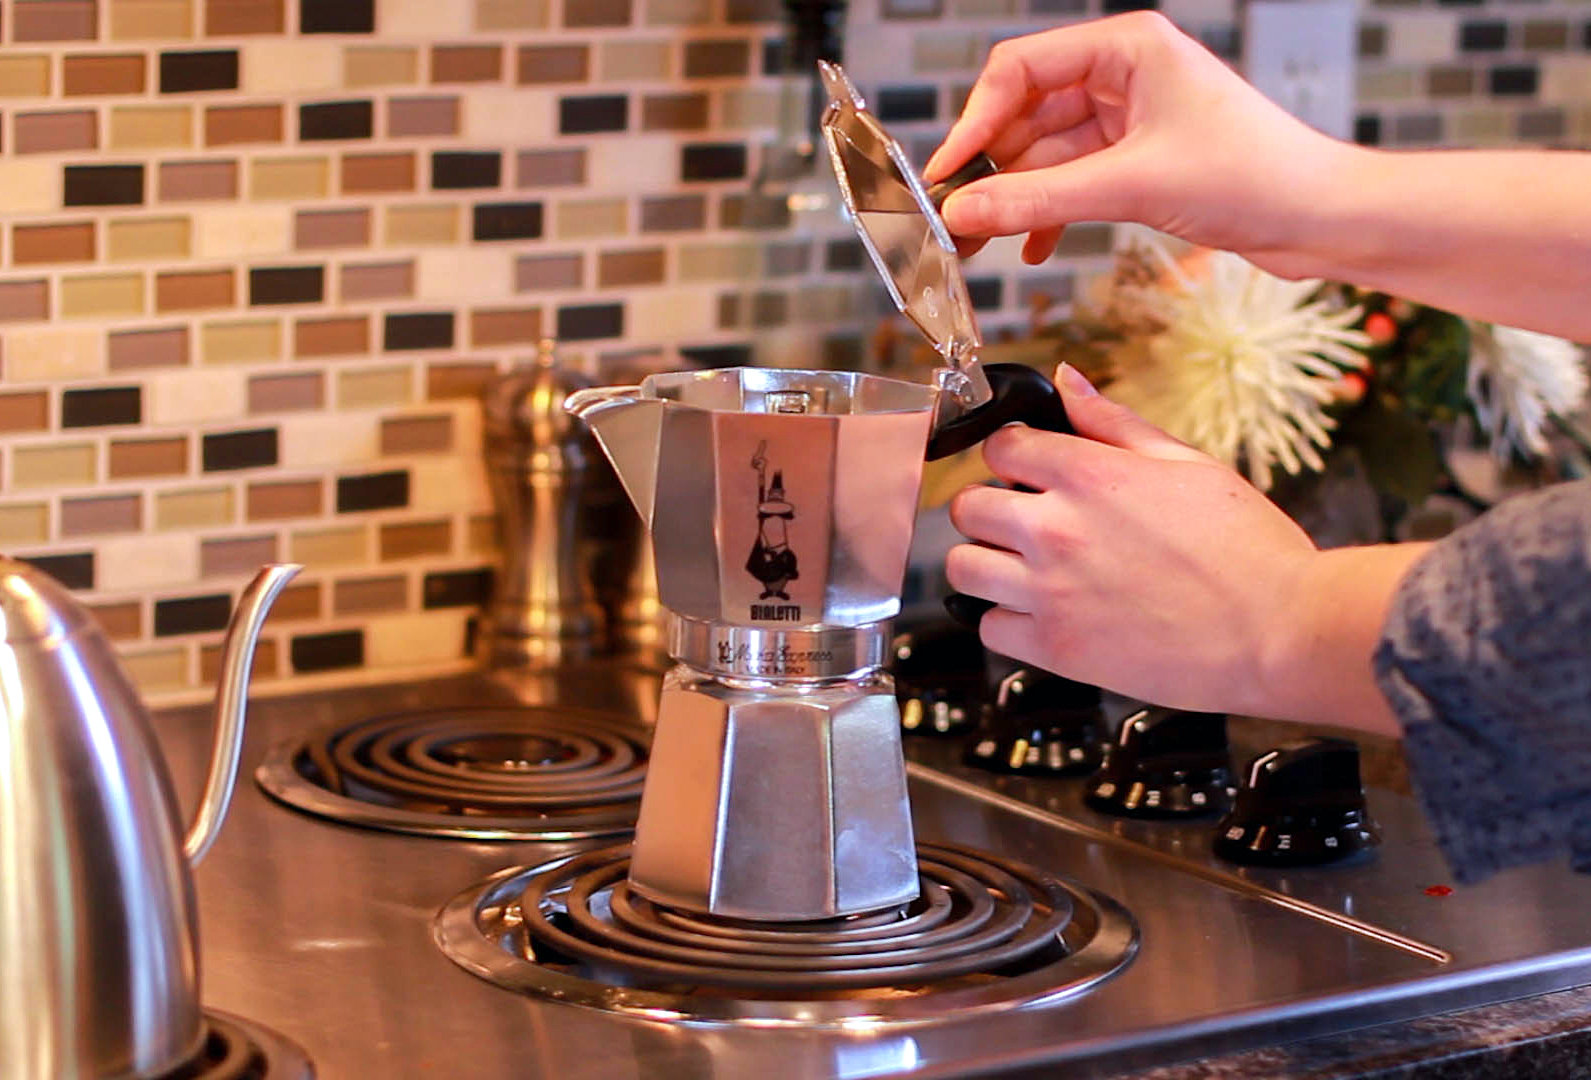 How to Use a Chemex to Make Coffee – A Couple Cooks